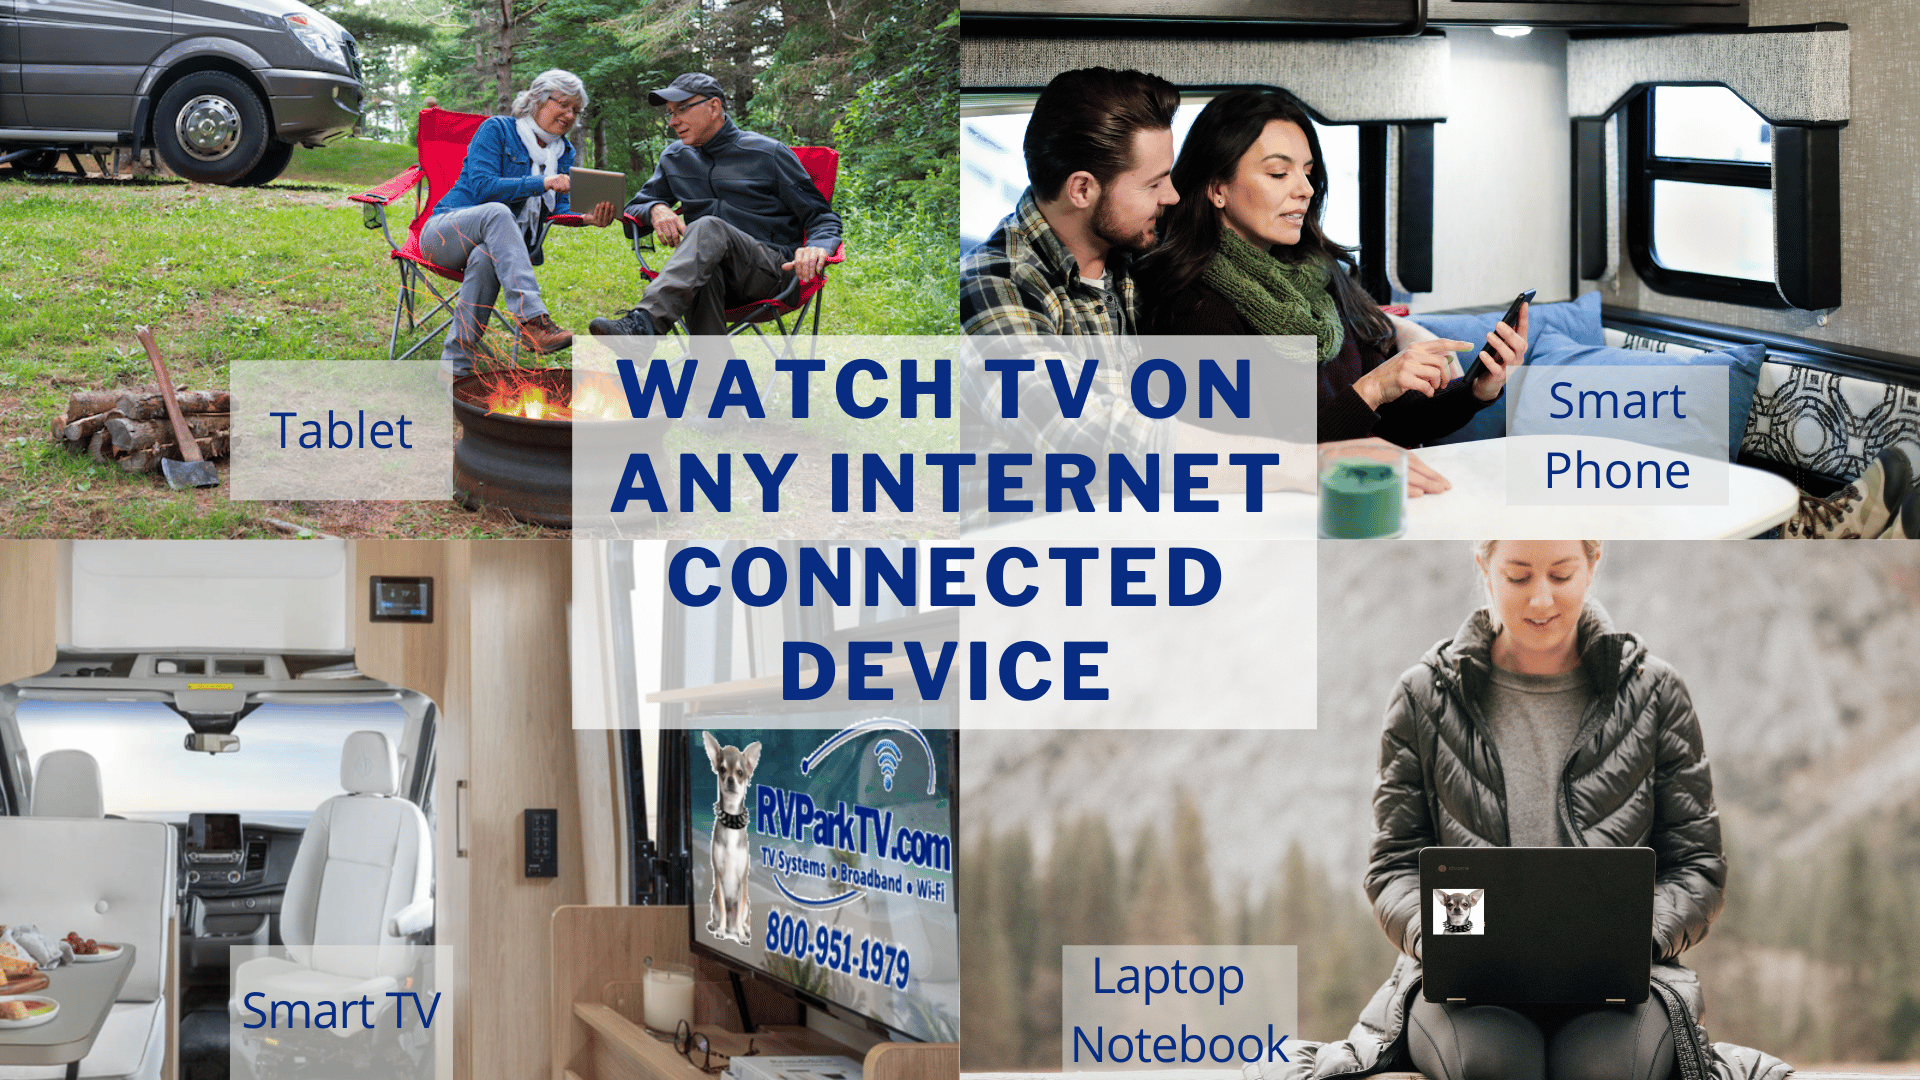 Home - RVParkTV.com - Watch TV on Any Internet Connected Device - TV Systems - Broadband - Wi-Fi Networks